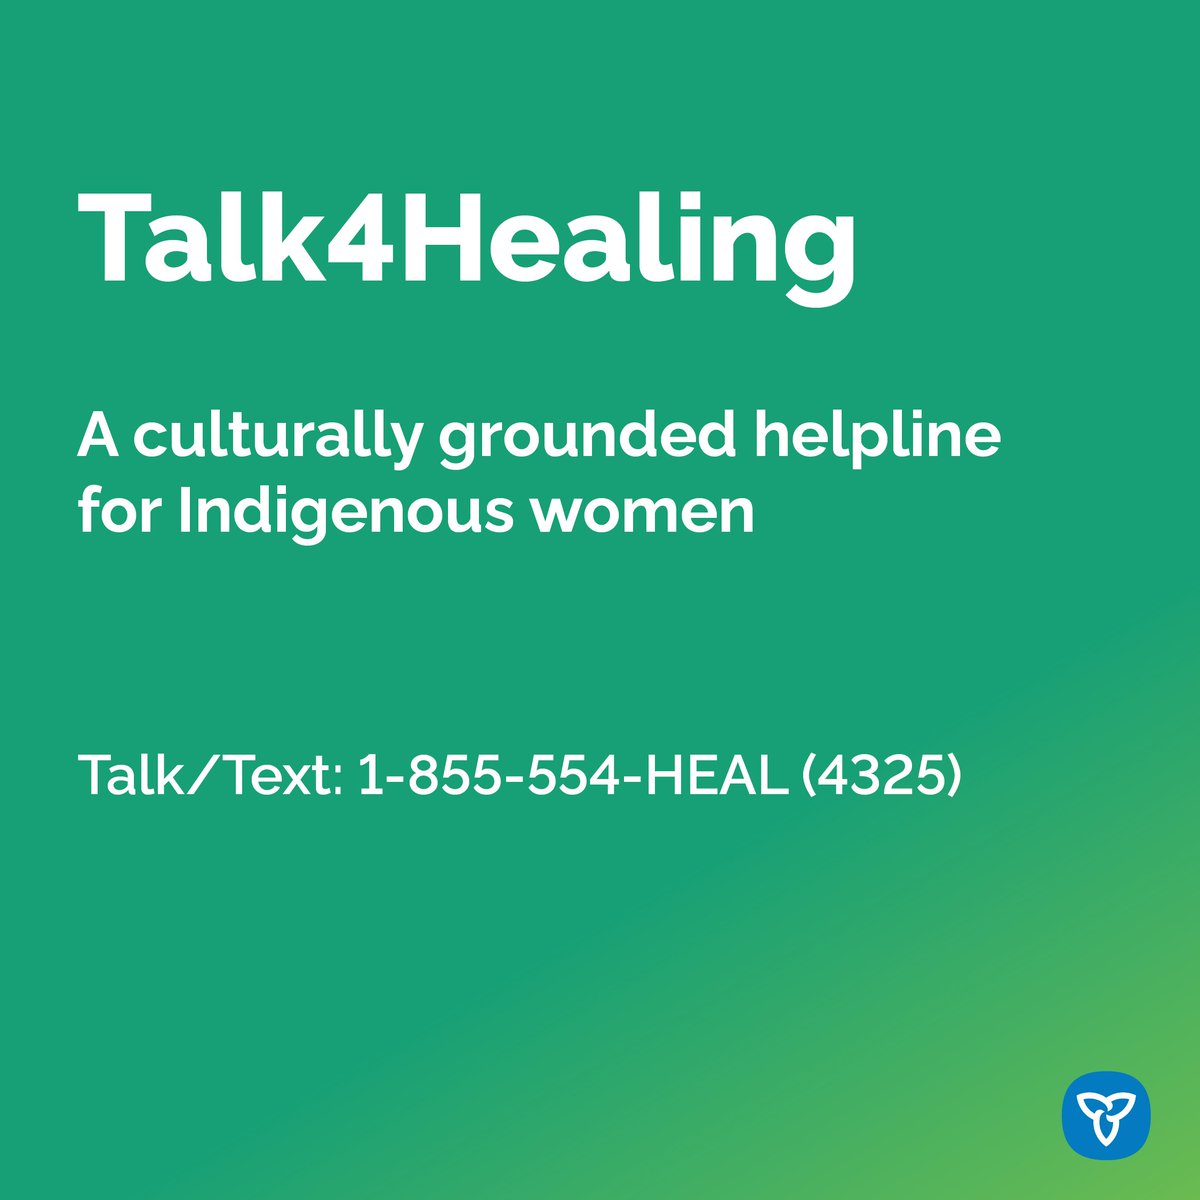 Run by and for Indigenous women, Talk4Healing is a confidential helpline that offers culturally grounded counselling, advice & support in a safe and accepting environment. Help is available 24/7 in 16 languages. Talk + text: 1-855-554-HEAL (4325) Chat: talk4healing.com